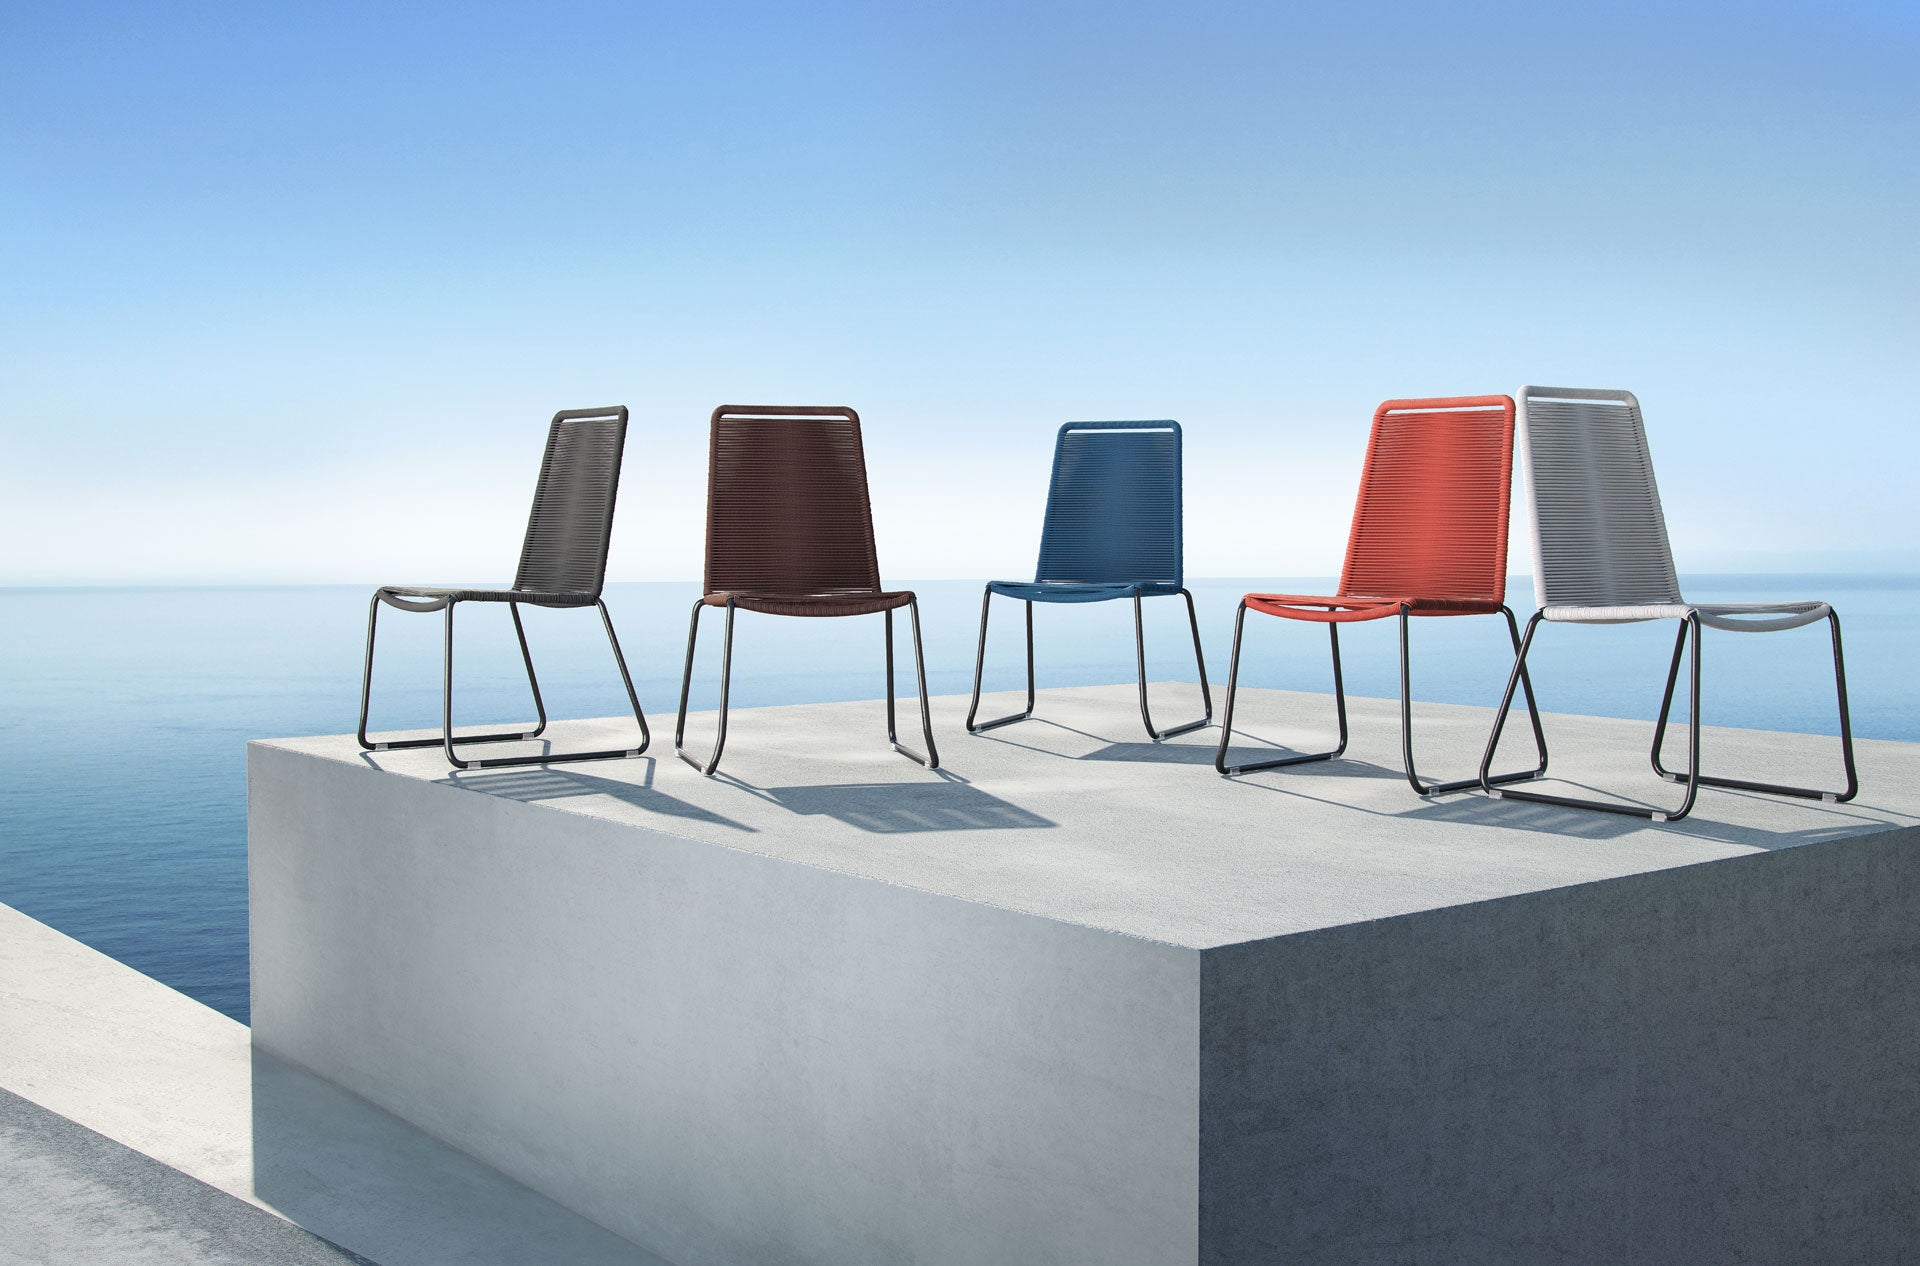 5 different colored chairs made from green materials sitting on a stone surface.